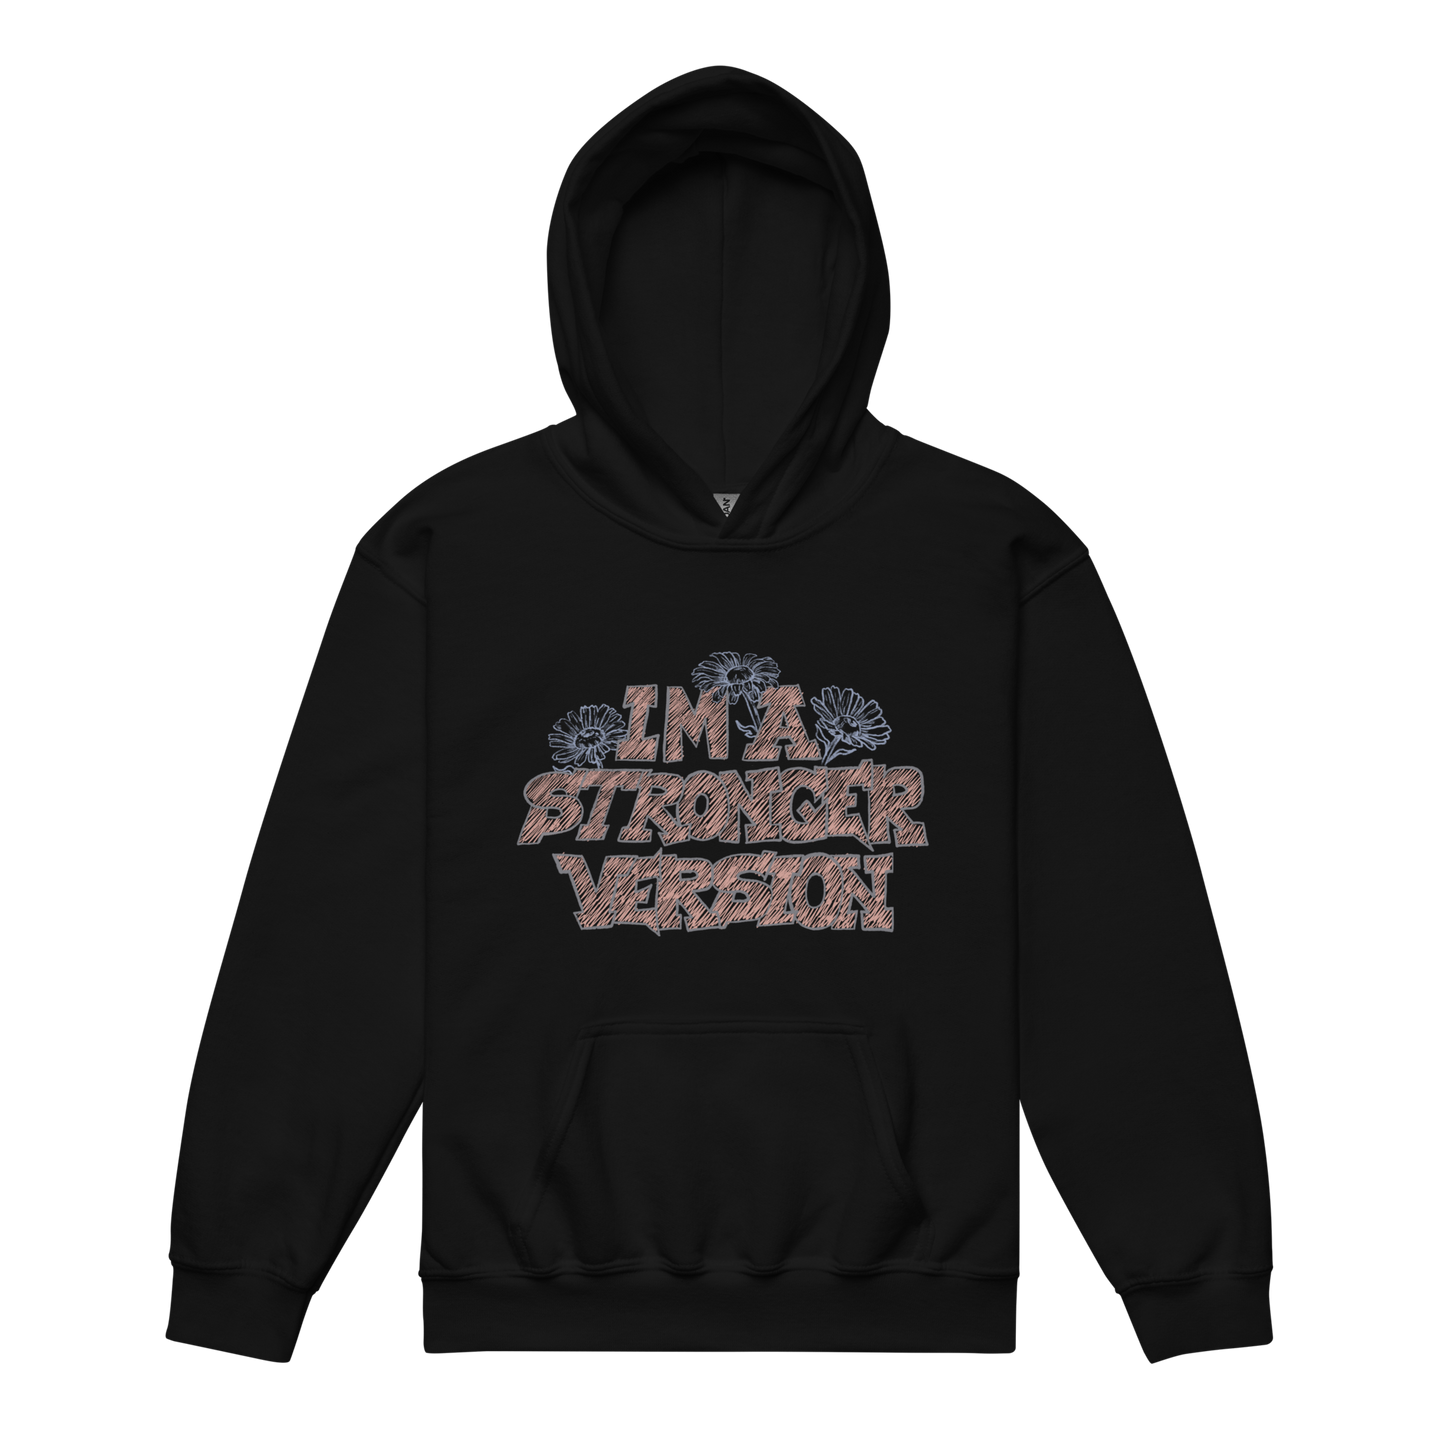 Youth " I am a Stronger Version" Hoodie